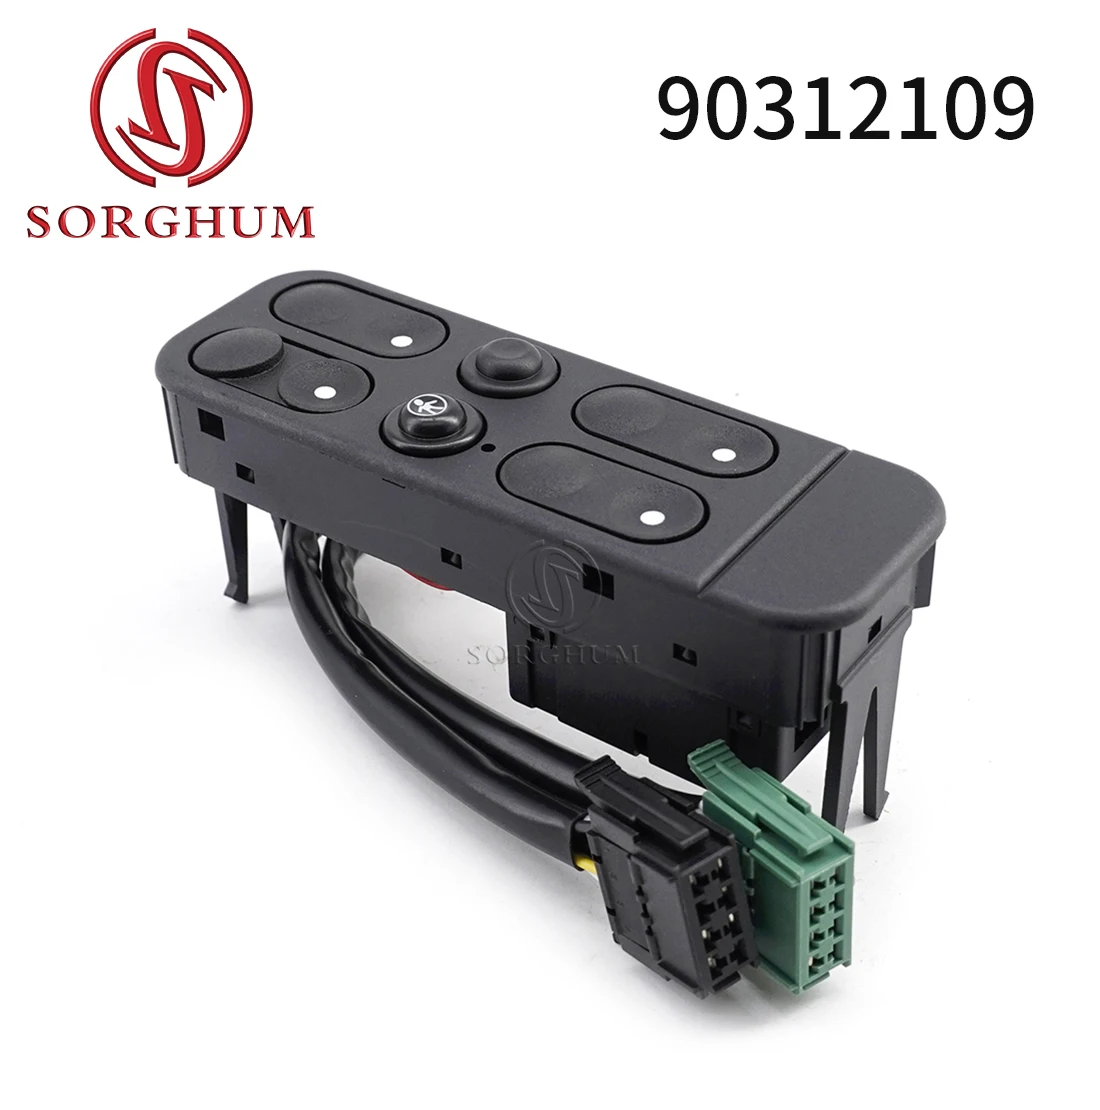 SORGHUM 90312109 For Opel Vectra A 1988-1995 New Car Electric Power Master Switch Window Lifter Control Regulator Button 1240600